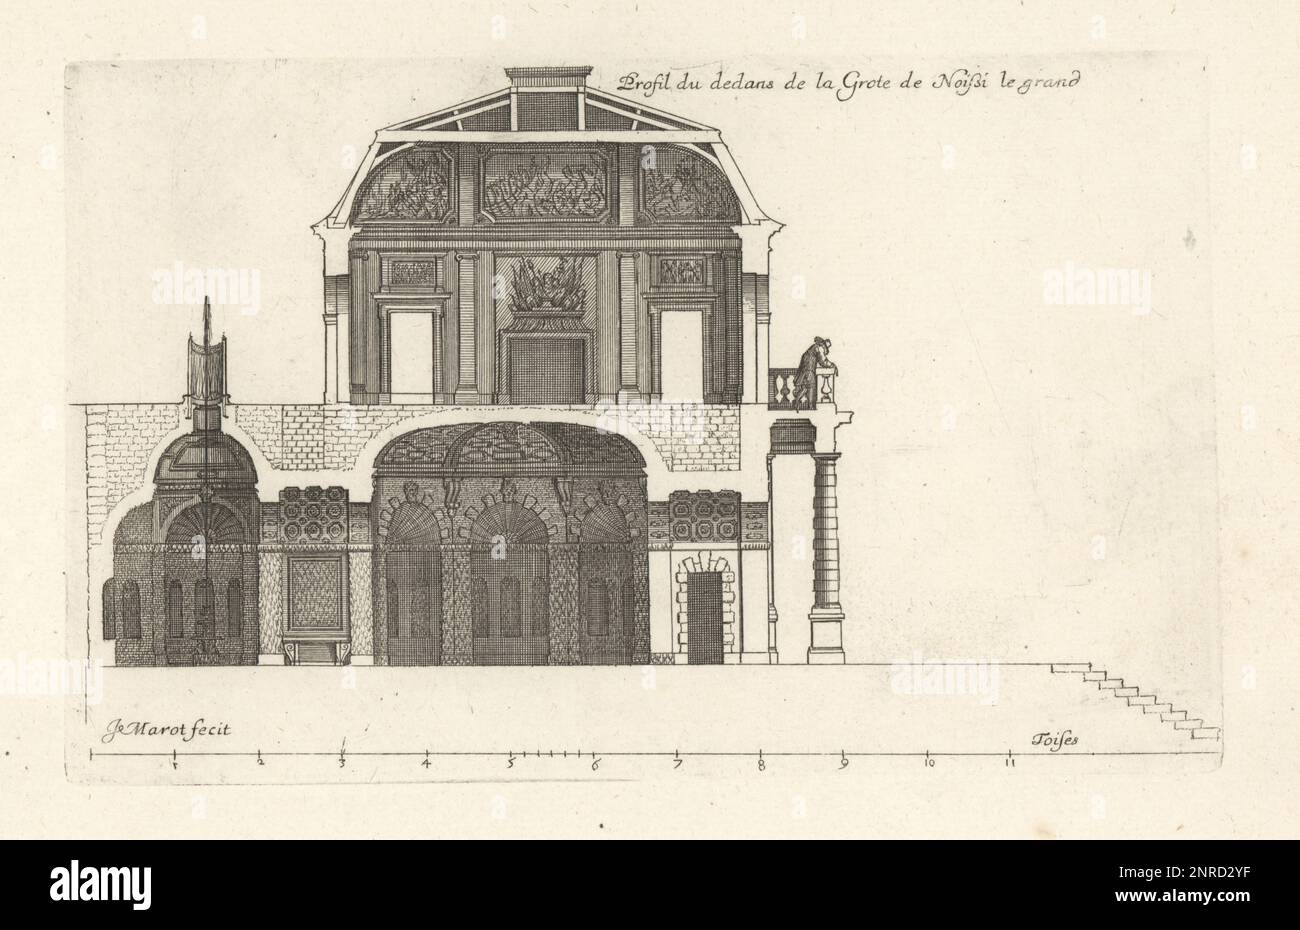 Section of the interior of the Grotto at the Chateau de Noisy-le-Grand or Noisy le Roi). Built for Albert de Gondi in 1582 and acquired by King Louis XIV. Demolished. Profil du dedans de la Grote de Noissi le grand. Copperplate engraving drawn and engraved by Jean Marot from his Recueil des Plans, Profils et Elevations de Plusieurs Palais, Chasteaux, Eglises, Sepultures, Grotes et Hotels, Collection of Plans, Profiles and Elevations of Palaces, Castles, Churches, Tombs, Grottos and Hotels, chez Mariette, Paris, 1655. Stock Photo